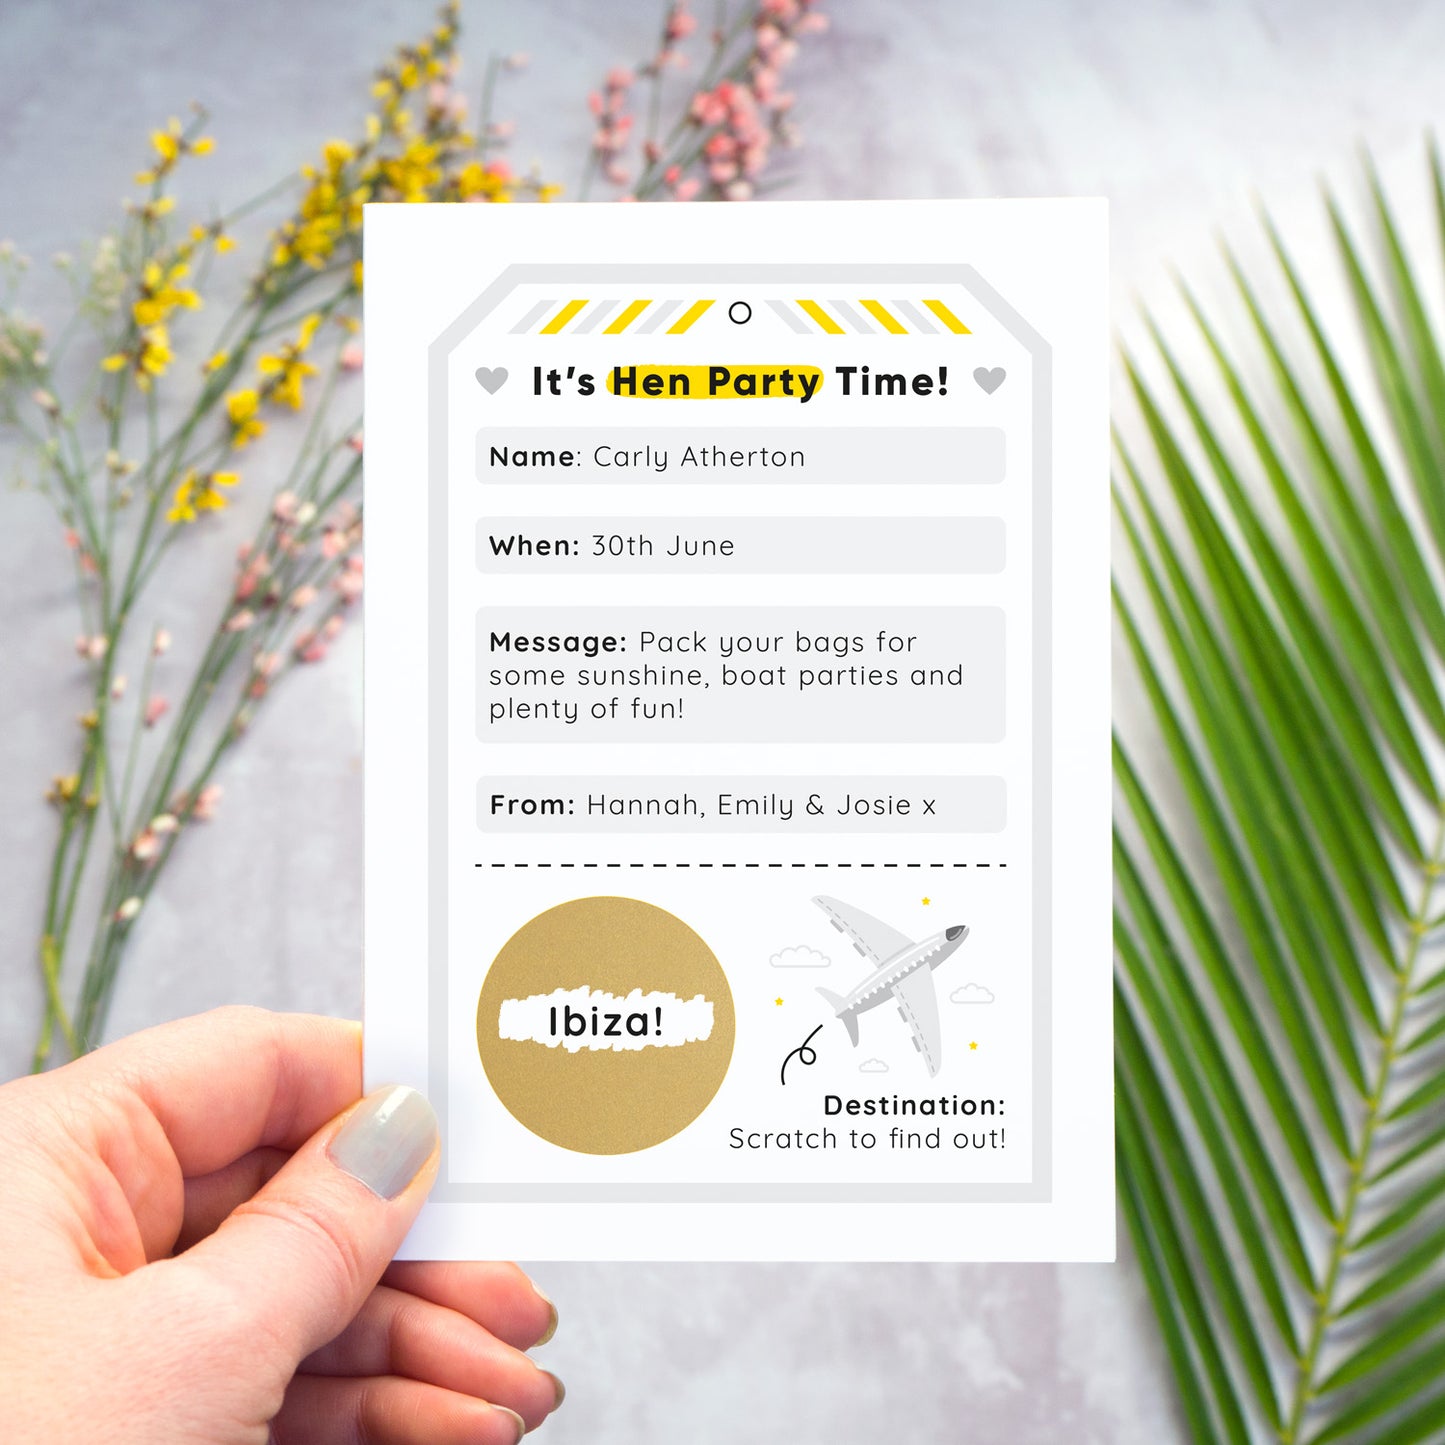 A hen party scratch and reveal card featuring a grey luggage tag and scratch off gold circle that has been photographed being held over a grey background with yellow and pink flowers and green foliage. The scratch panel has been scratched off to reveal the hen do destination.